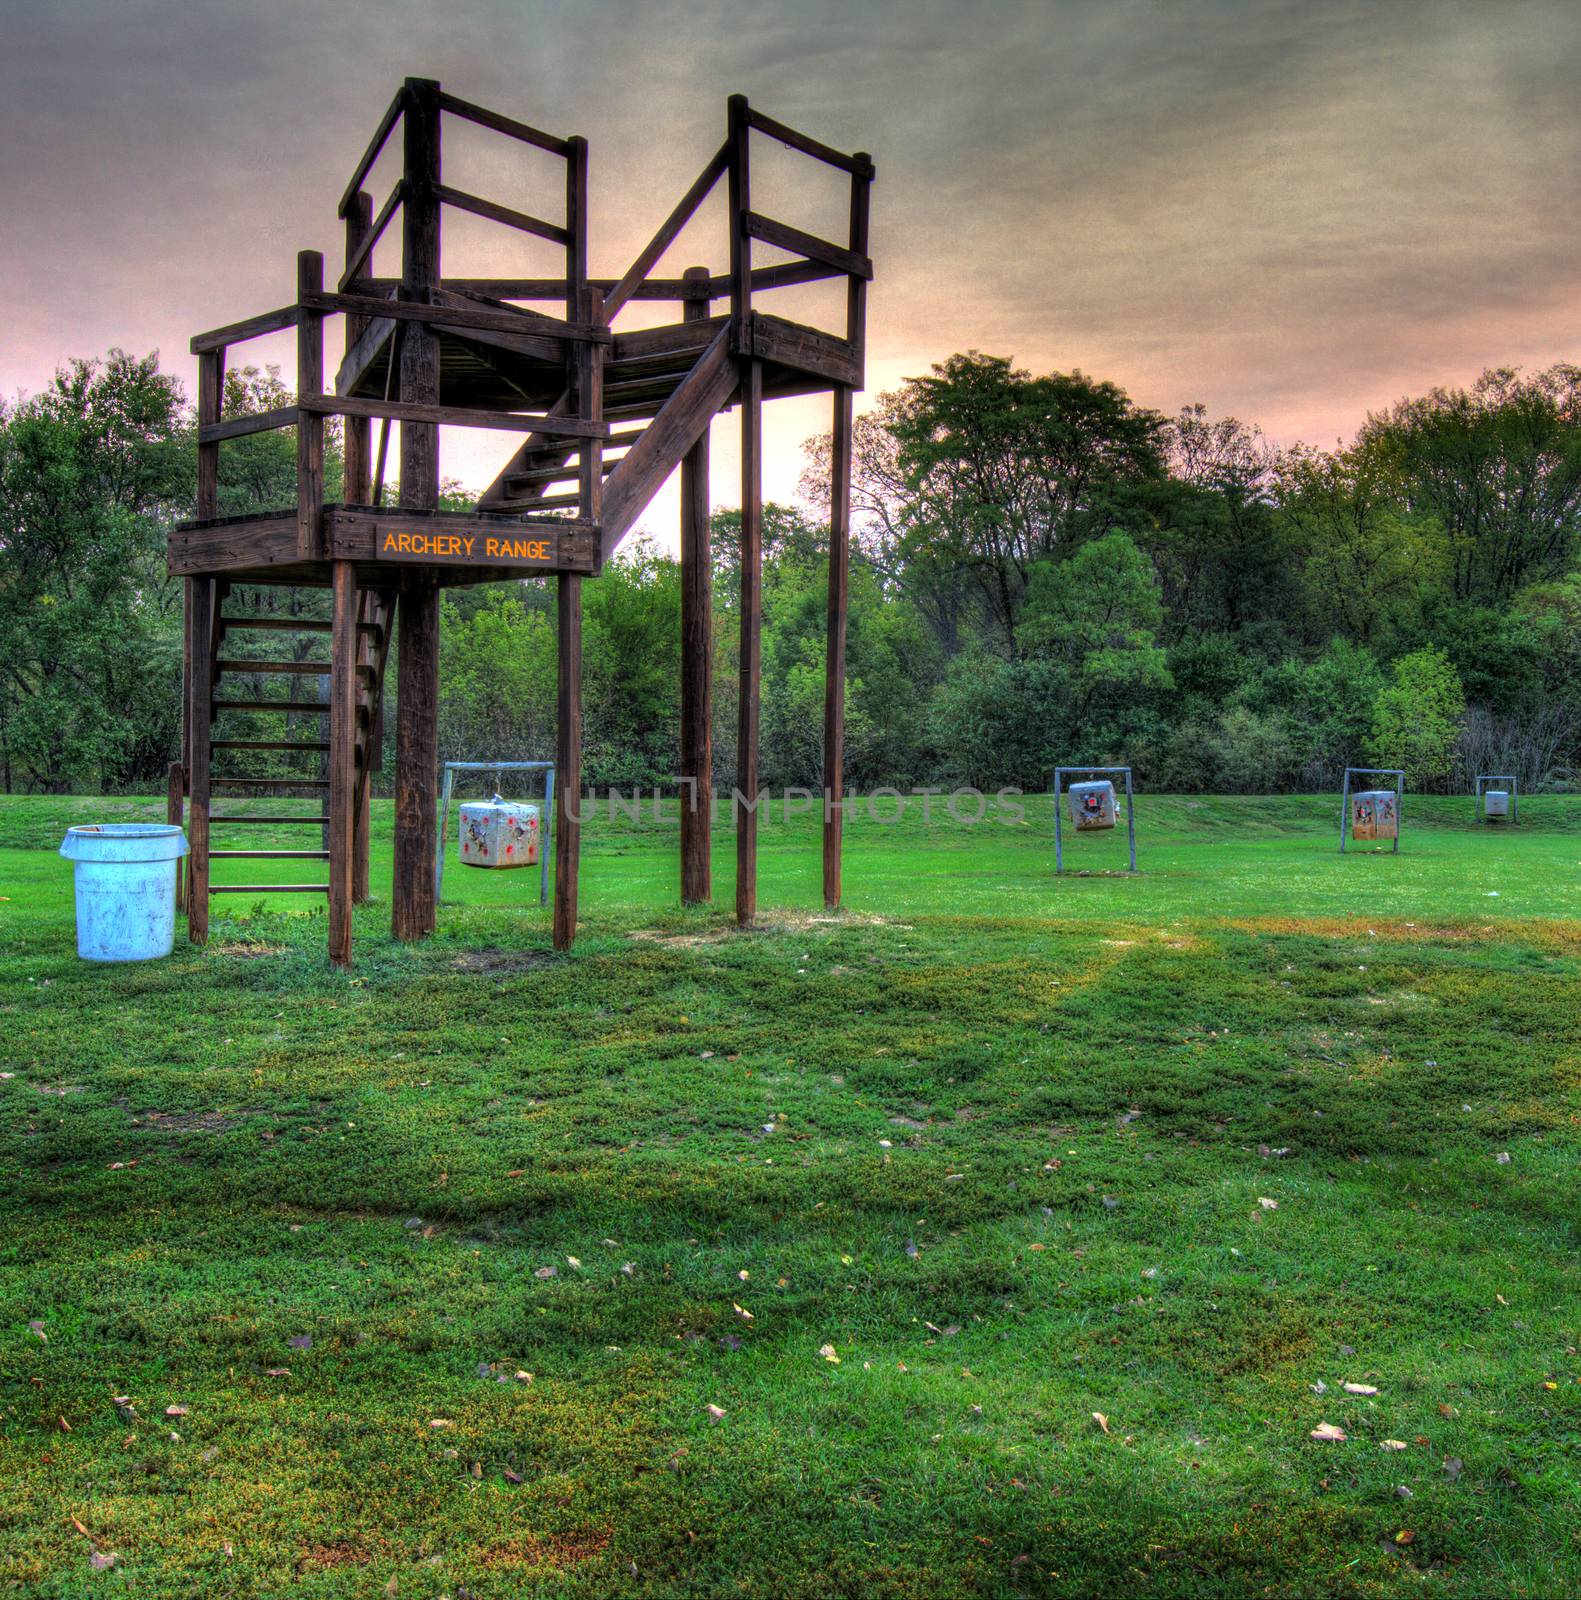 Field archery range at a park in hdr